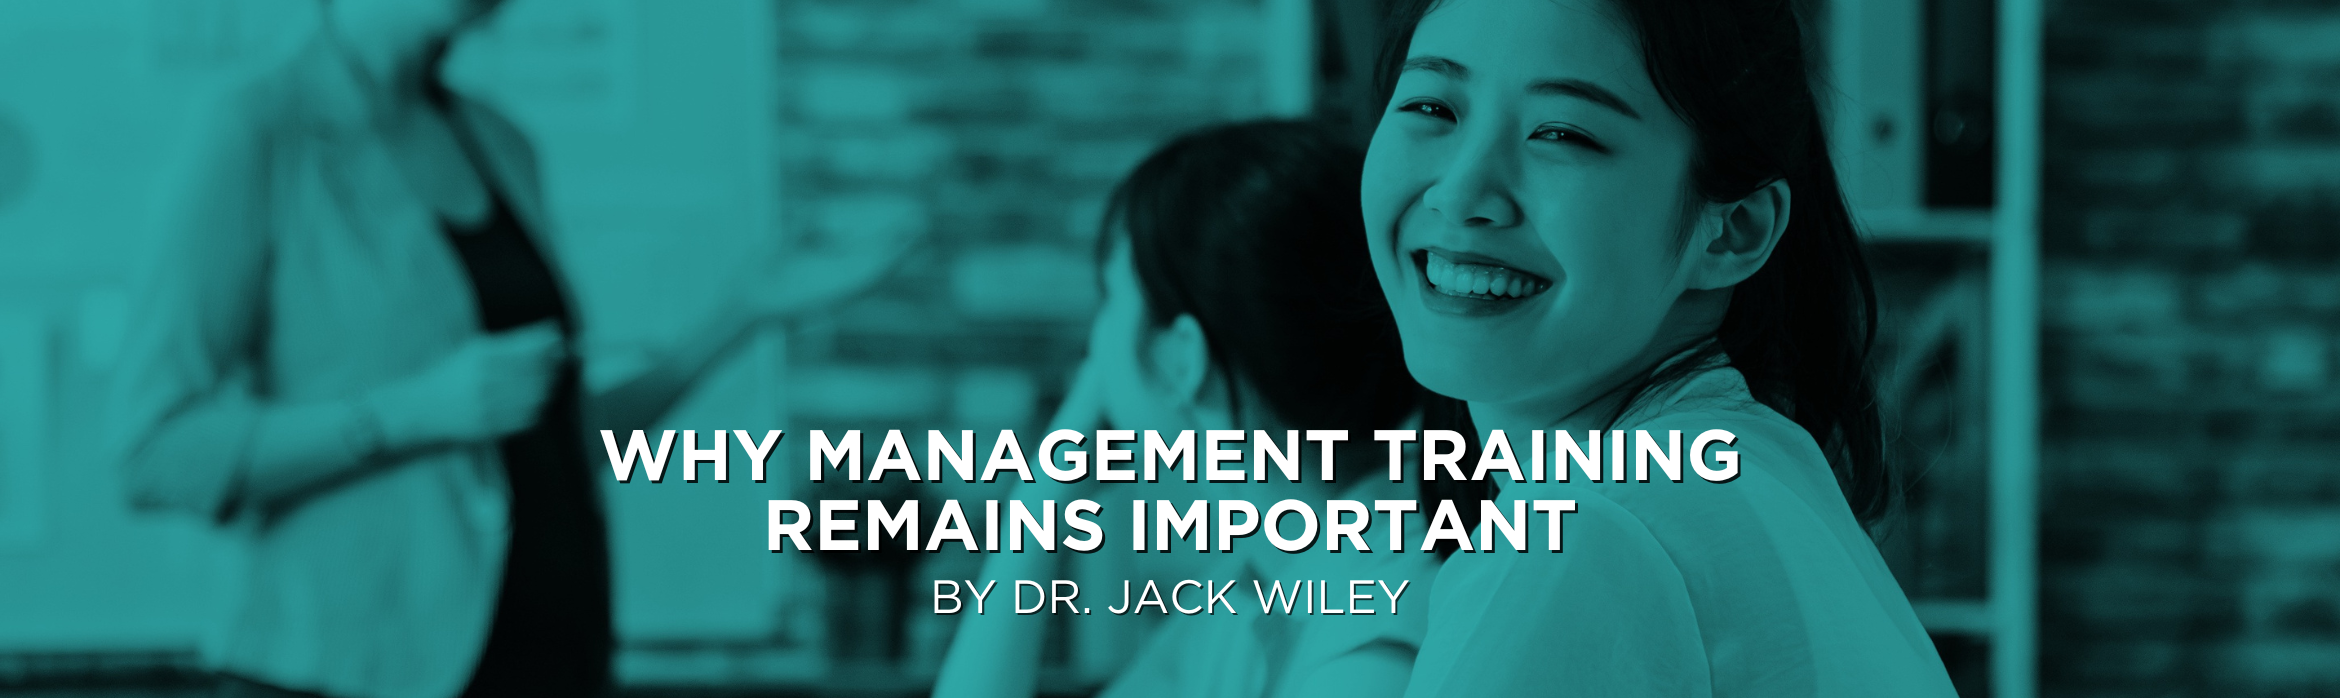 Why Management Training Remains Important